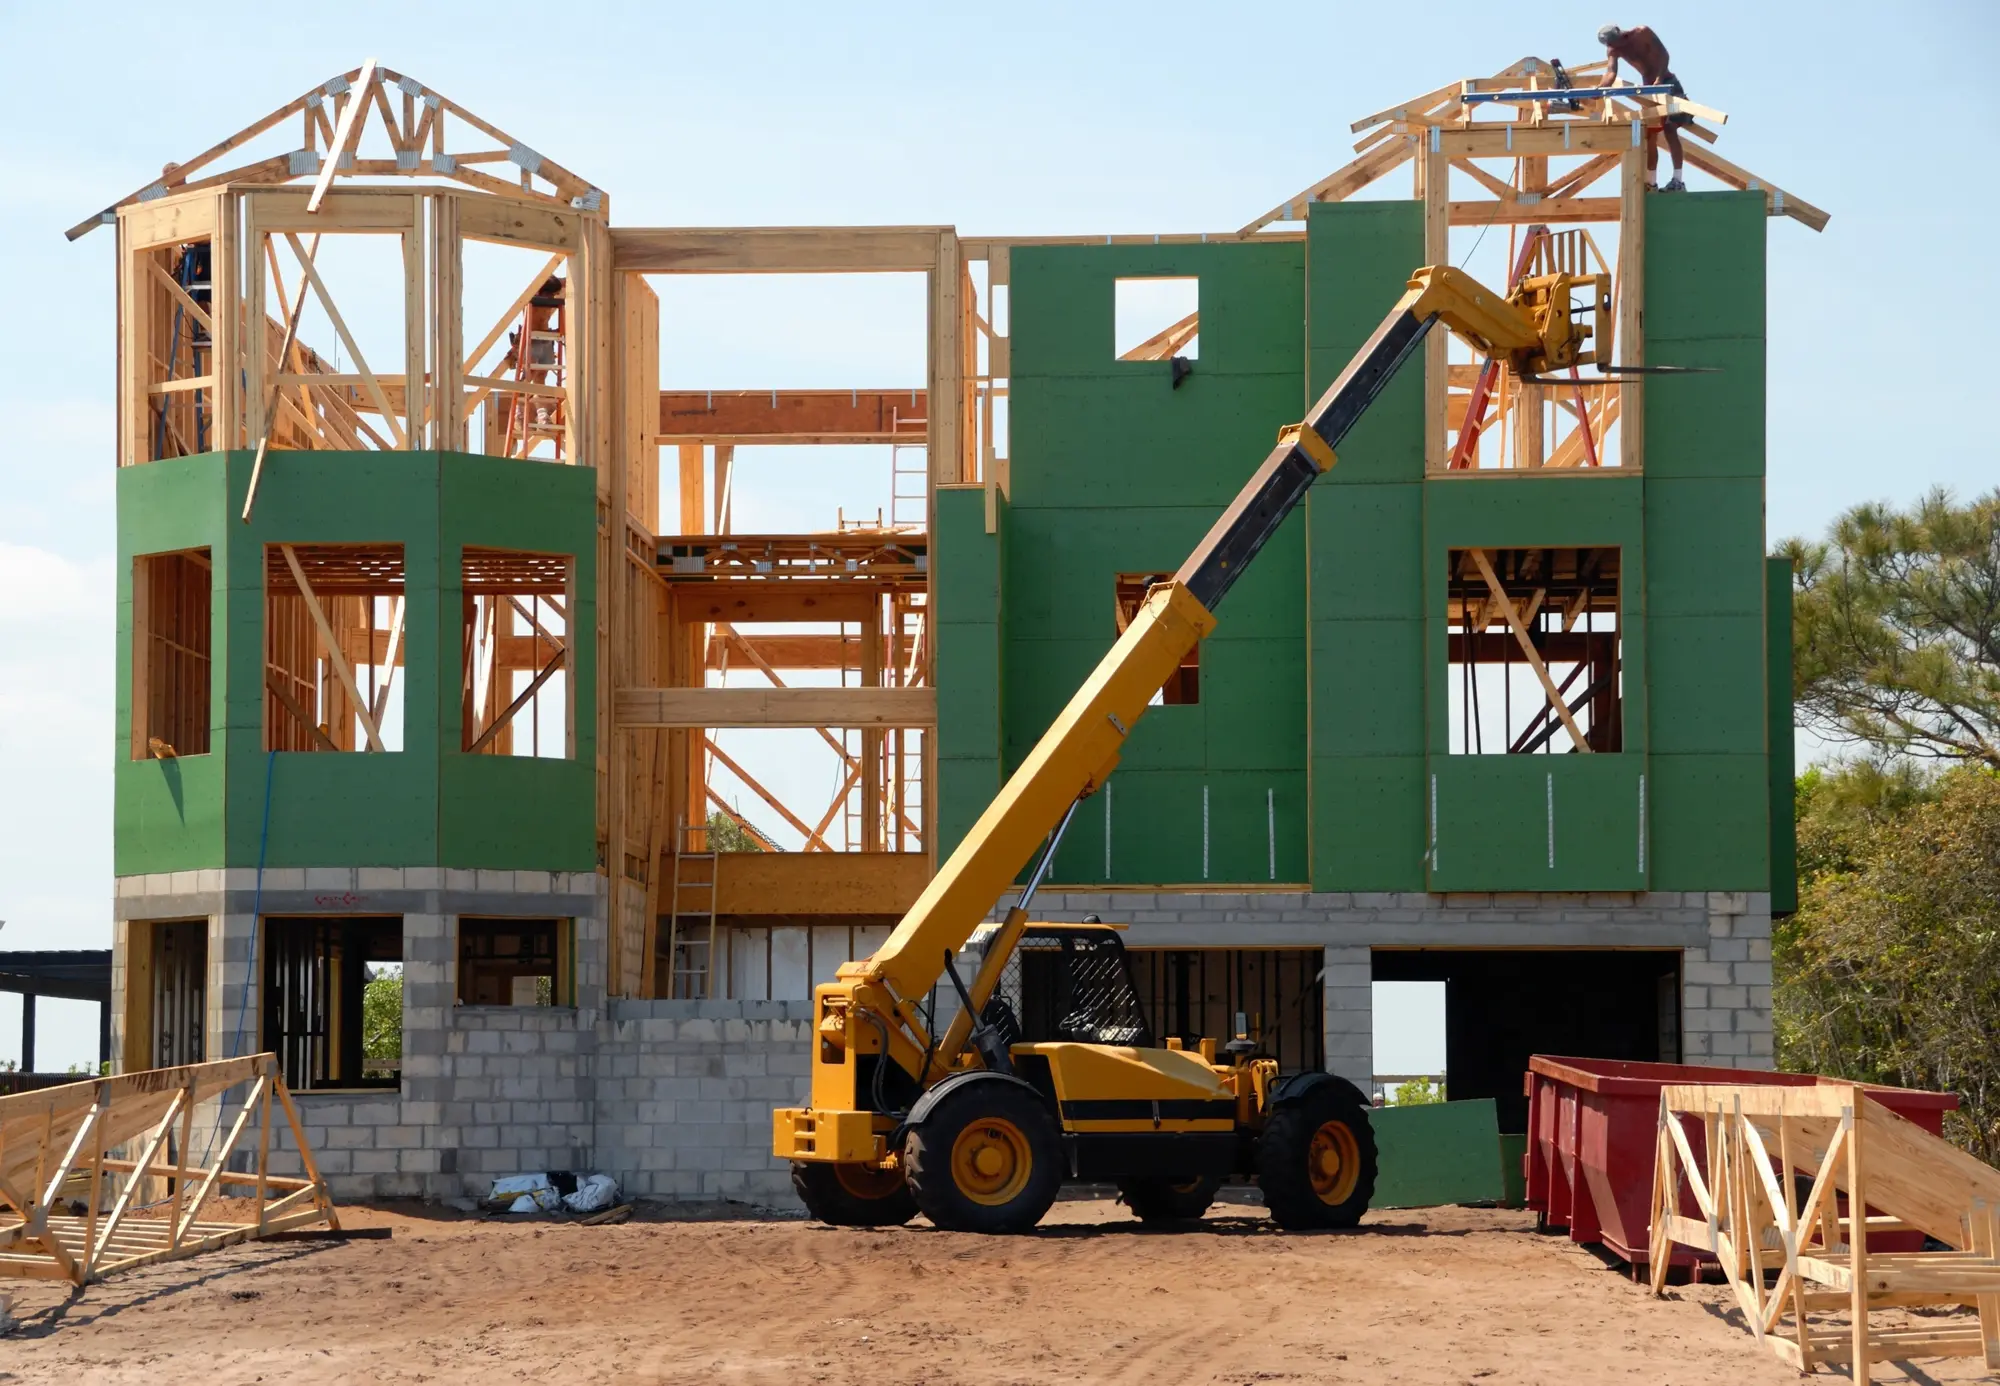 Construction companies can benefit from a construction va to help with various pain points